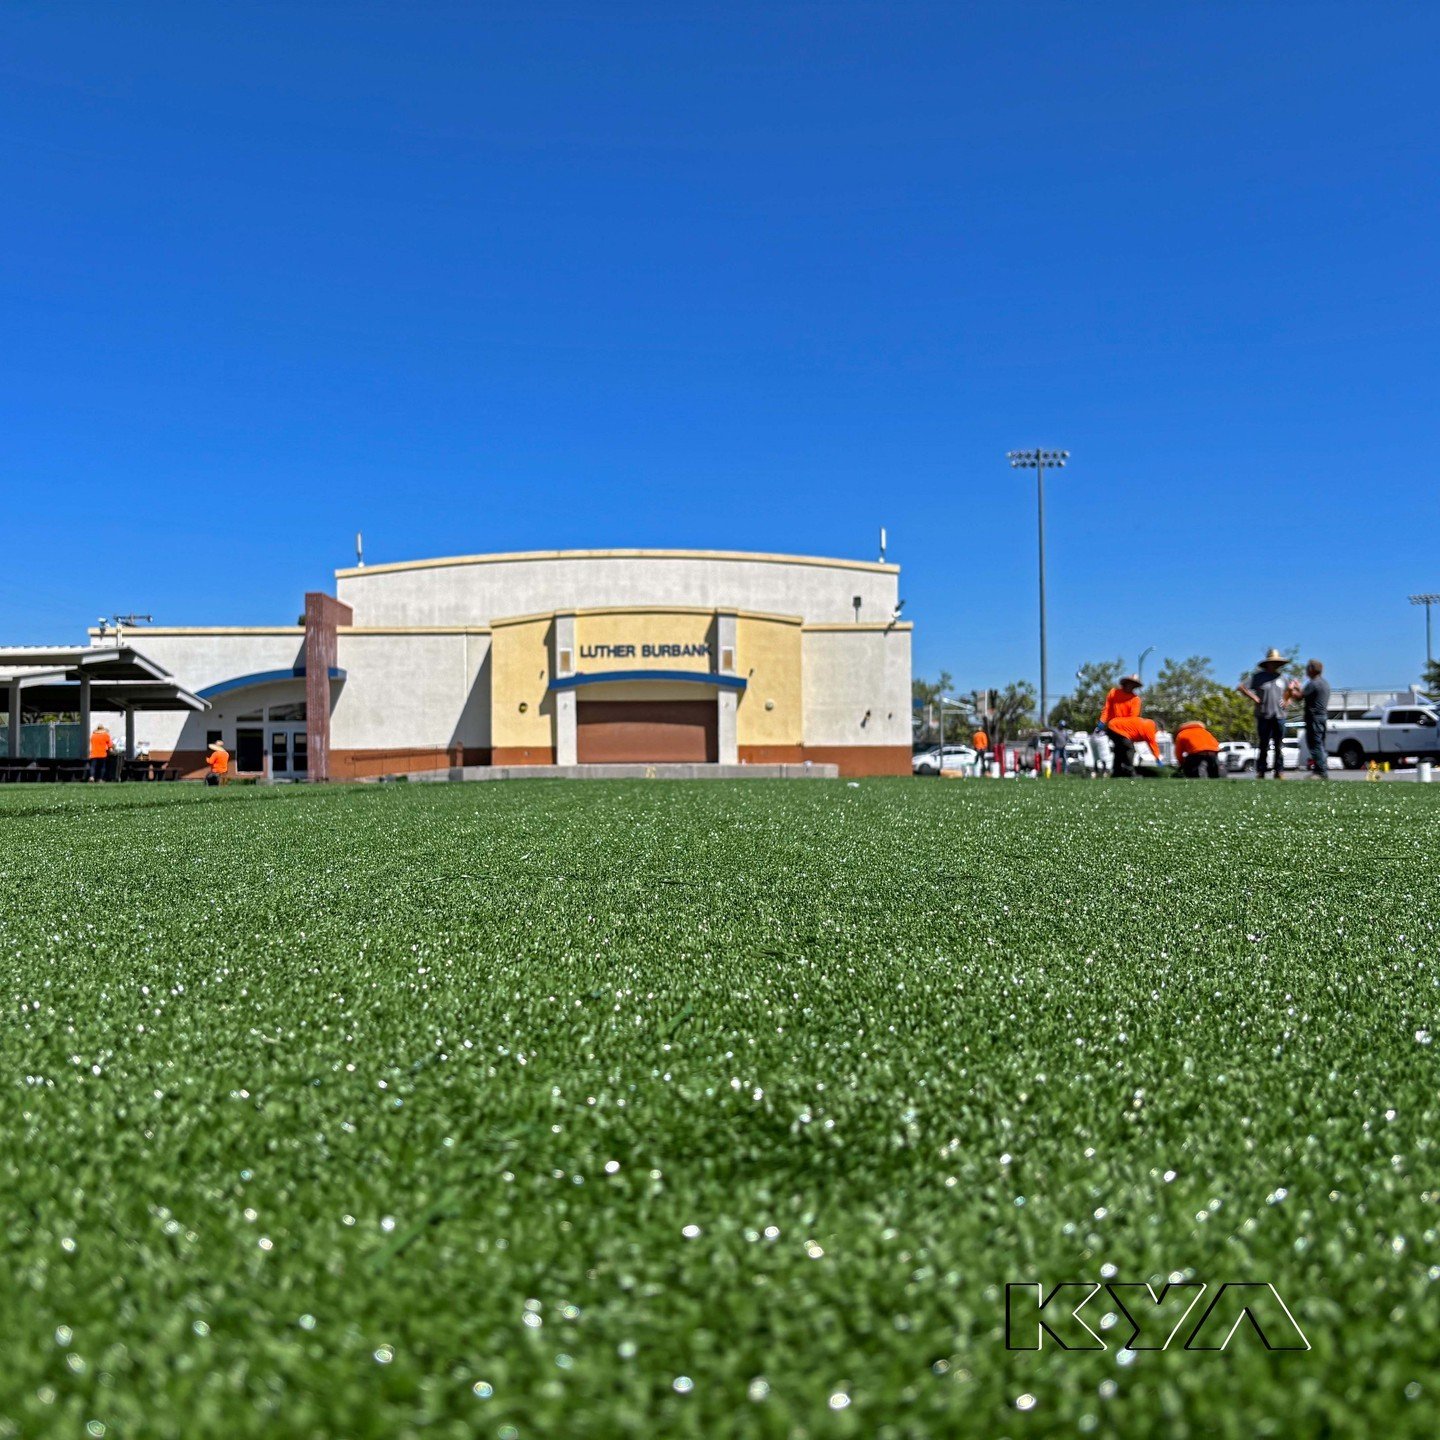 Here's a sneak peek at Luther Burbank's newest turf field install! The new turf space will be an invaluable play area for the students throughout the year. Stay tuned to see the final field soon! #FieldFriday #turffield #ItTakesATeam